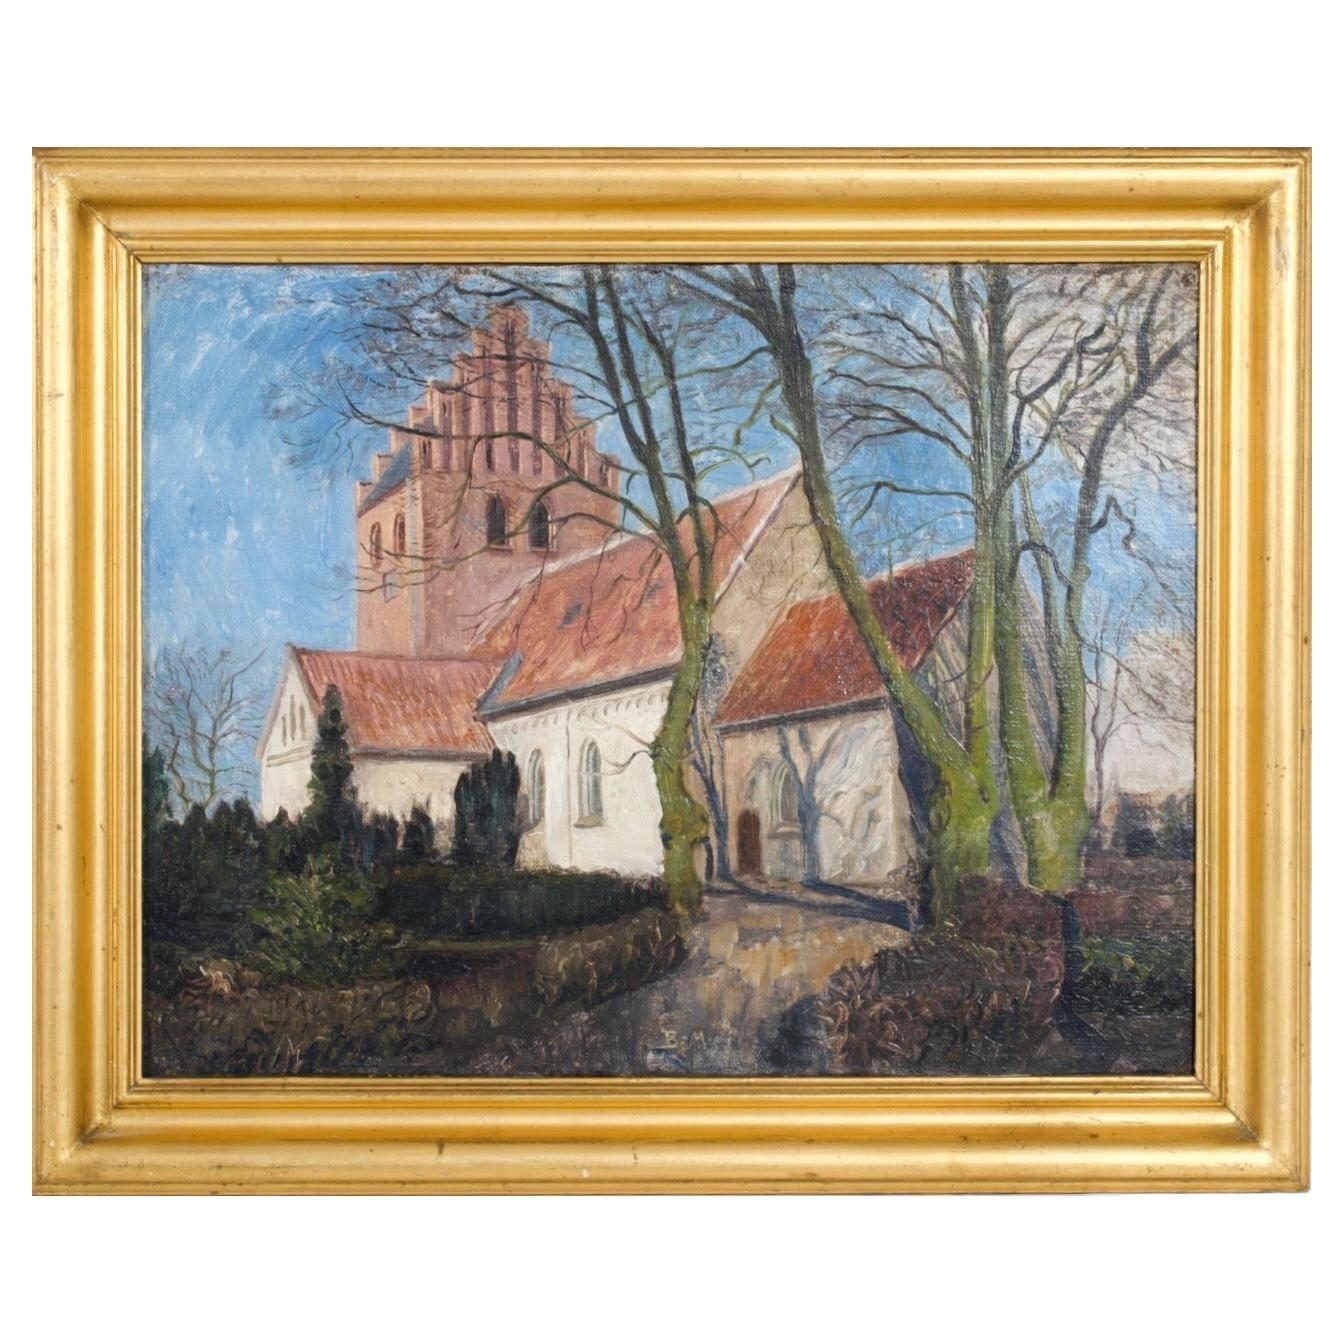 Danish oil painting, signed “BM” circa 100 years old.